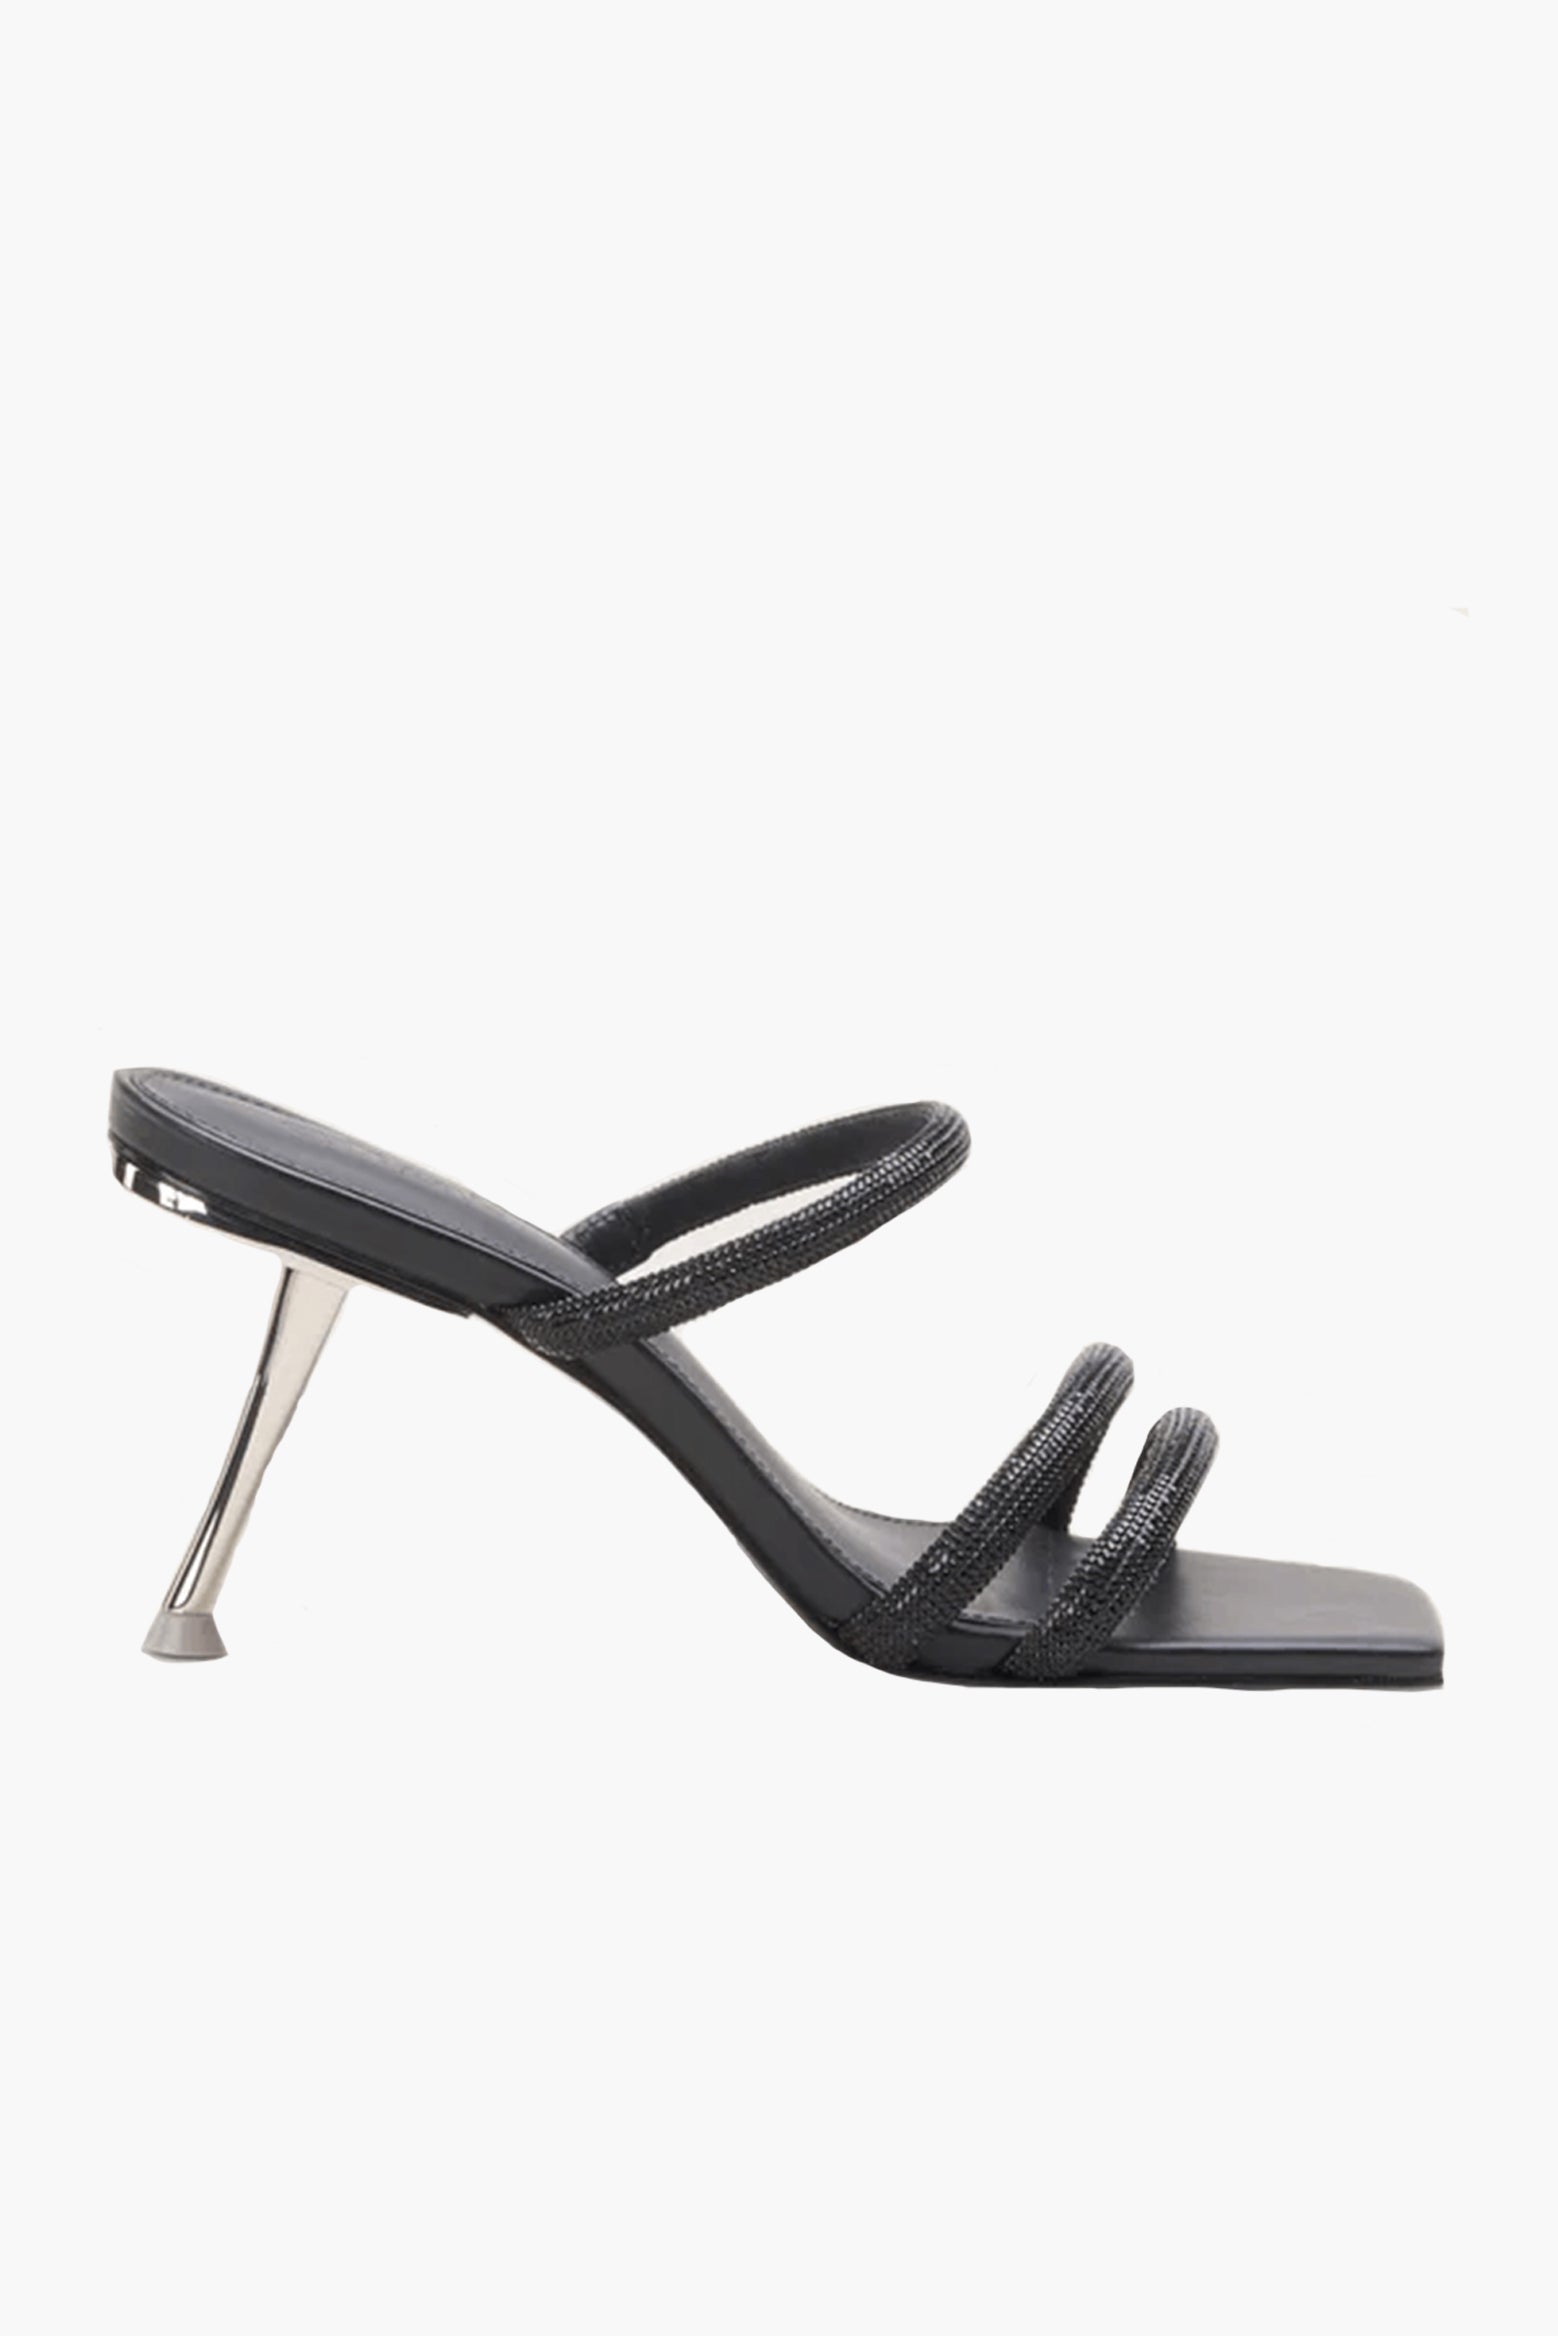 Cult Gaia Anya Sandal in Black available at The New Trend Australia.